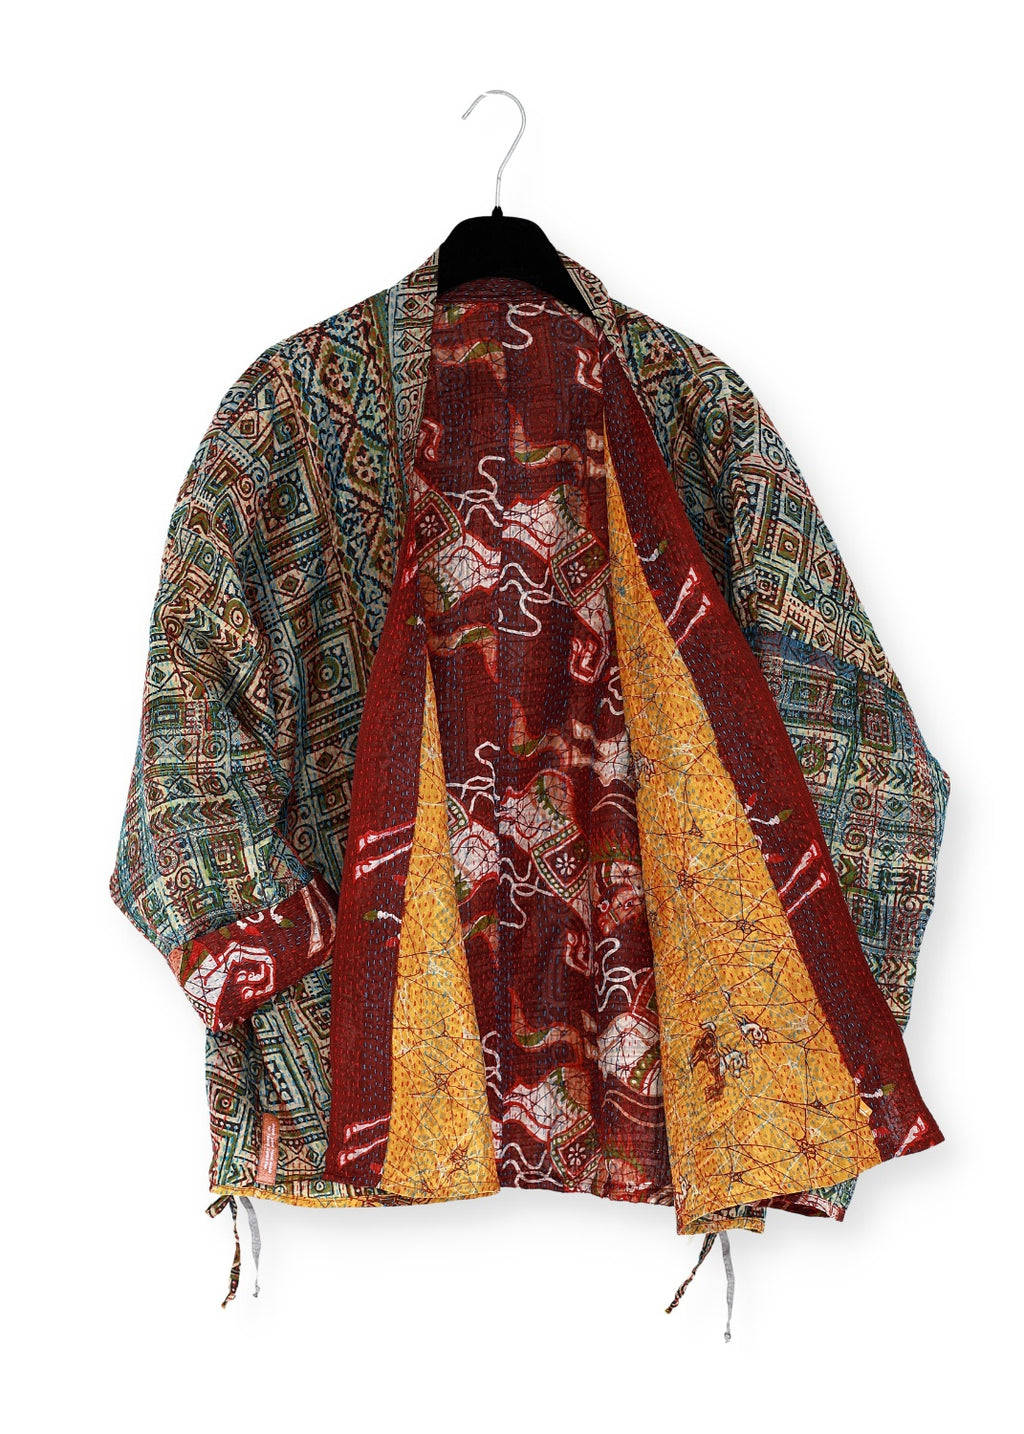 Reversible one of a kind silk jacket from collected vintage fabrics. A beautiful blend of art and craft.